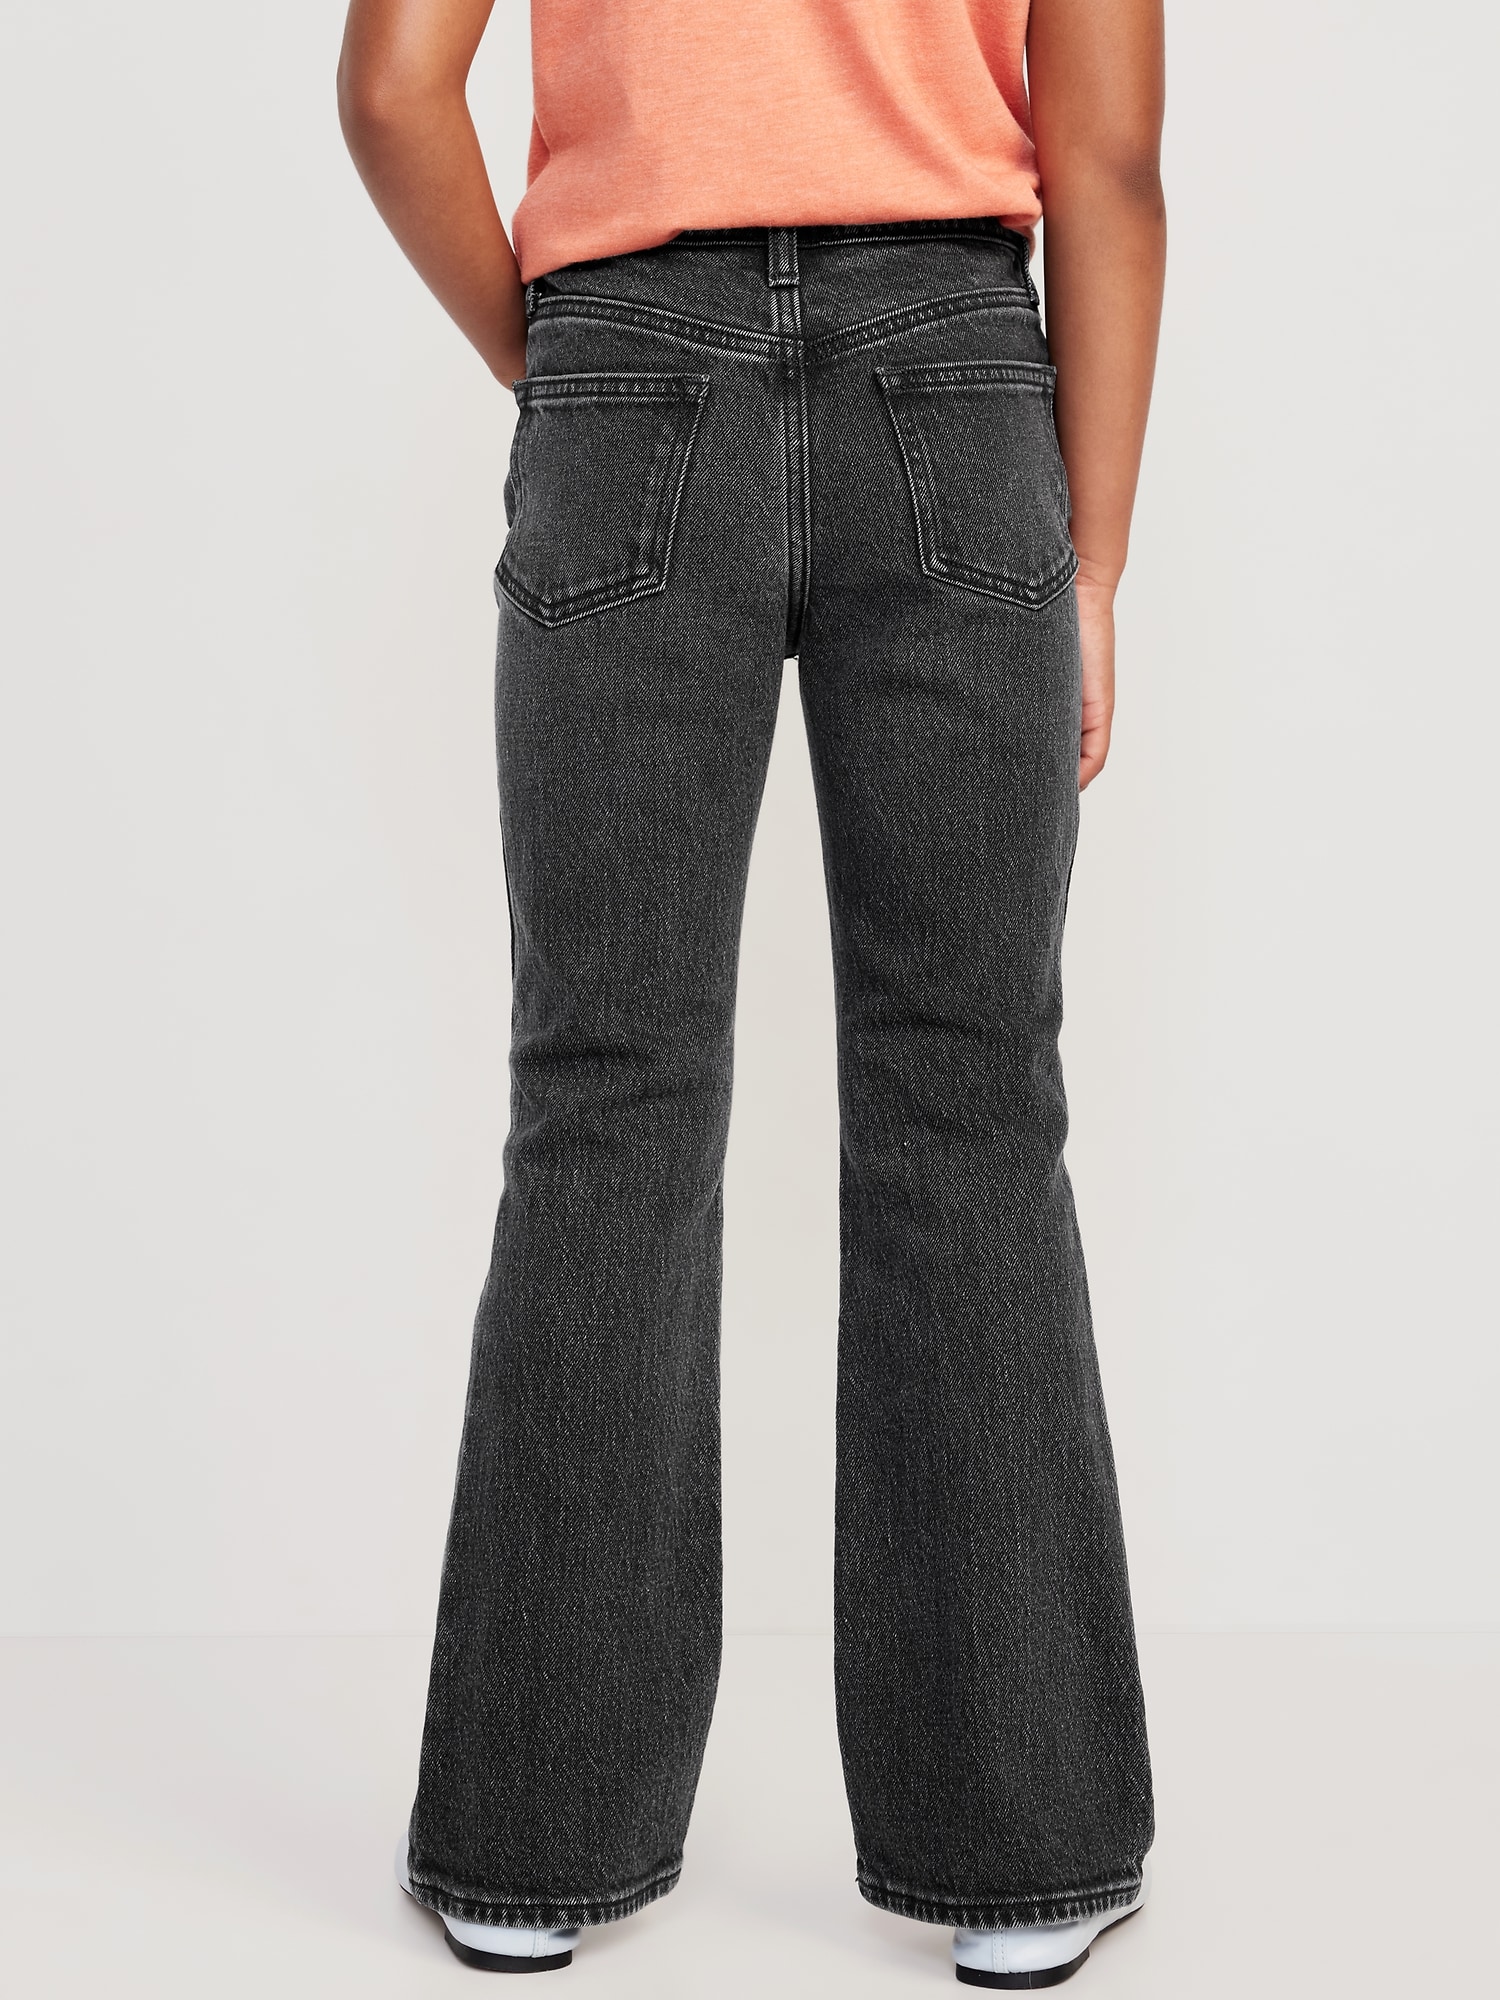 High-Waisted Flare Jeans for Girls, Old Navy